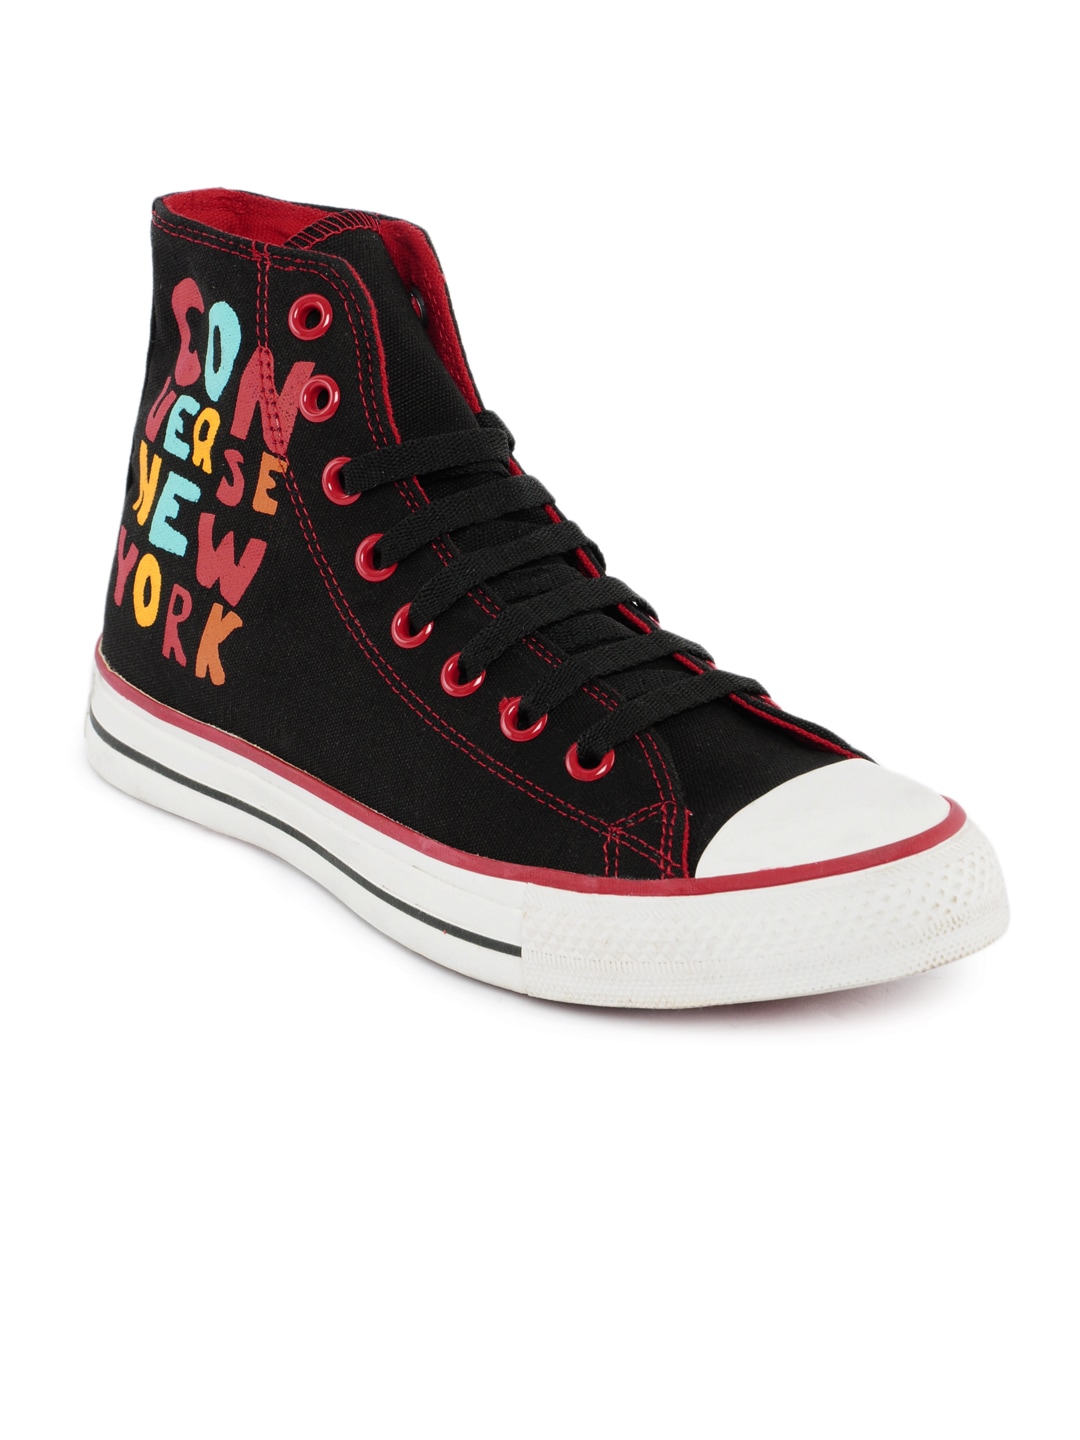 Converse Unisex Chuck Taylor All Stars New York Black Casual Shoes